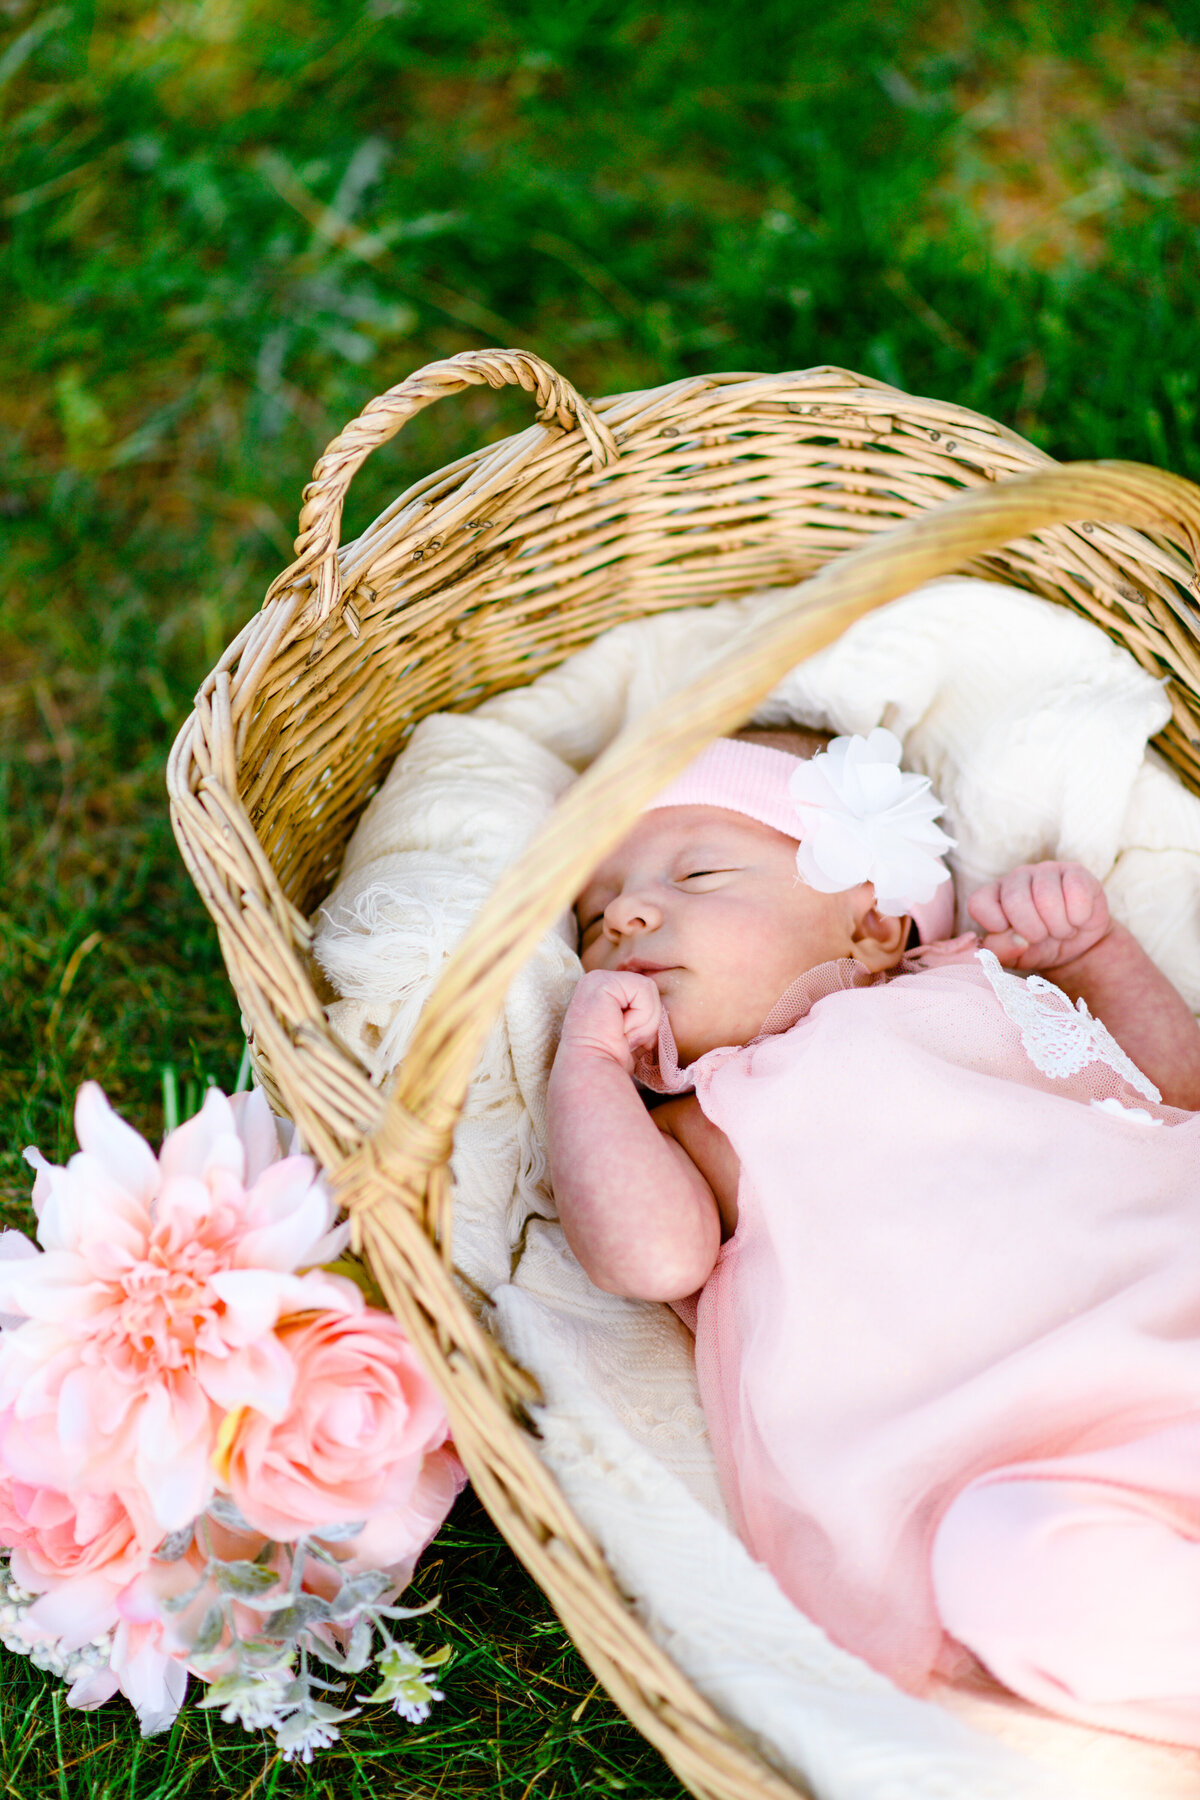 Outdoor newborn session with baby girl in basket